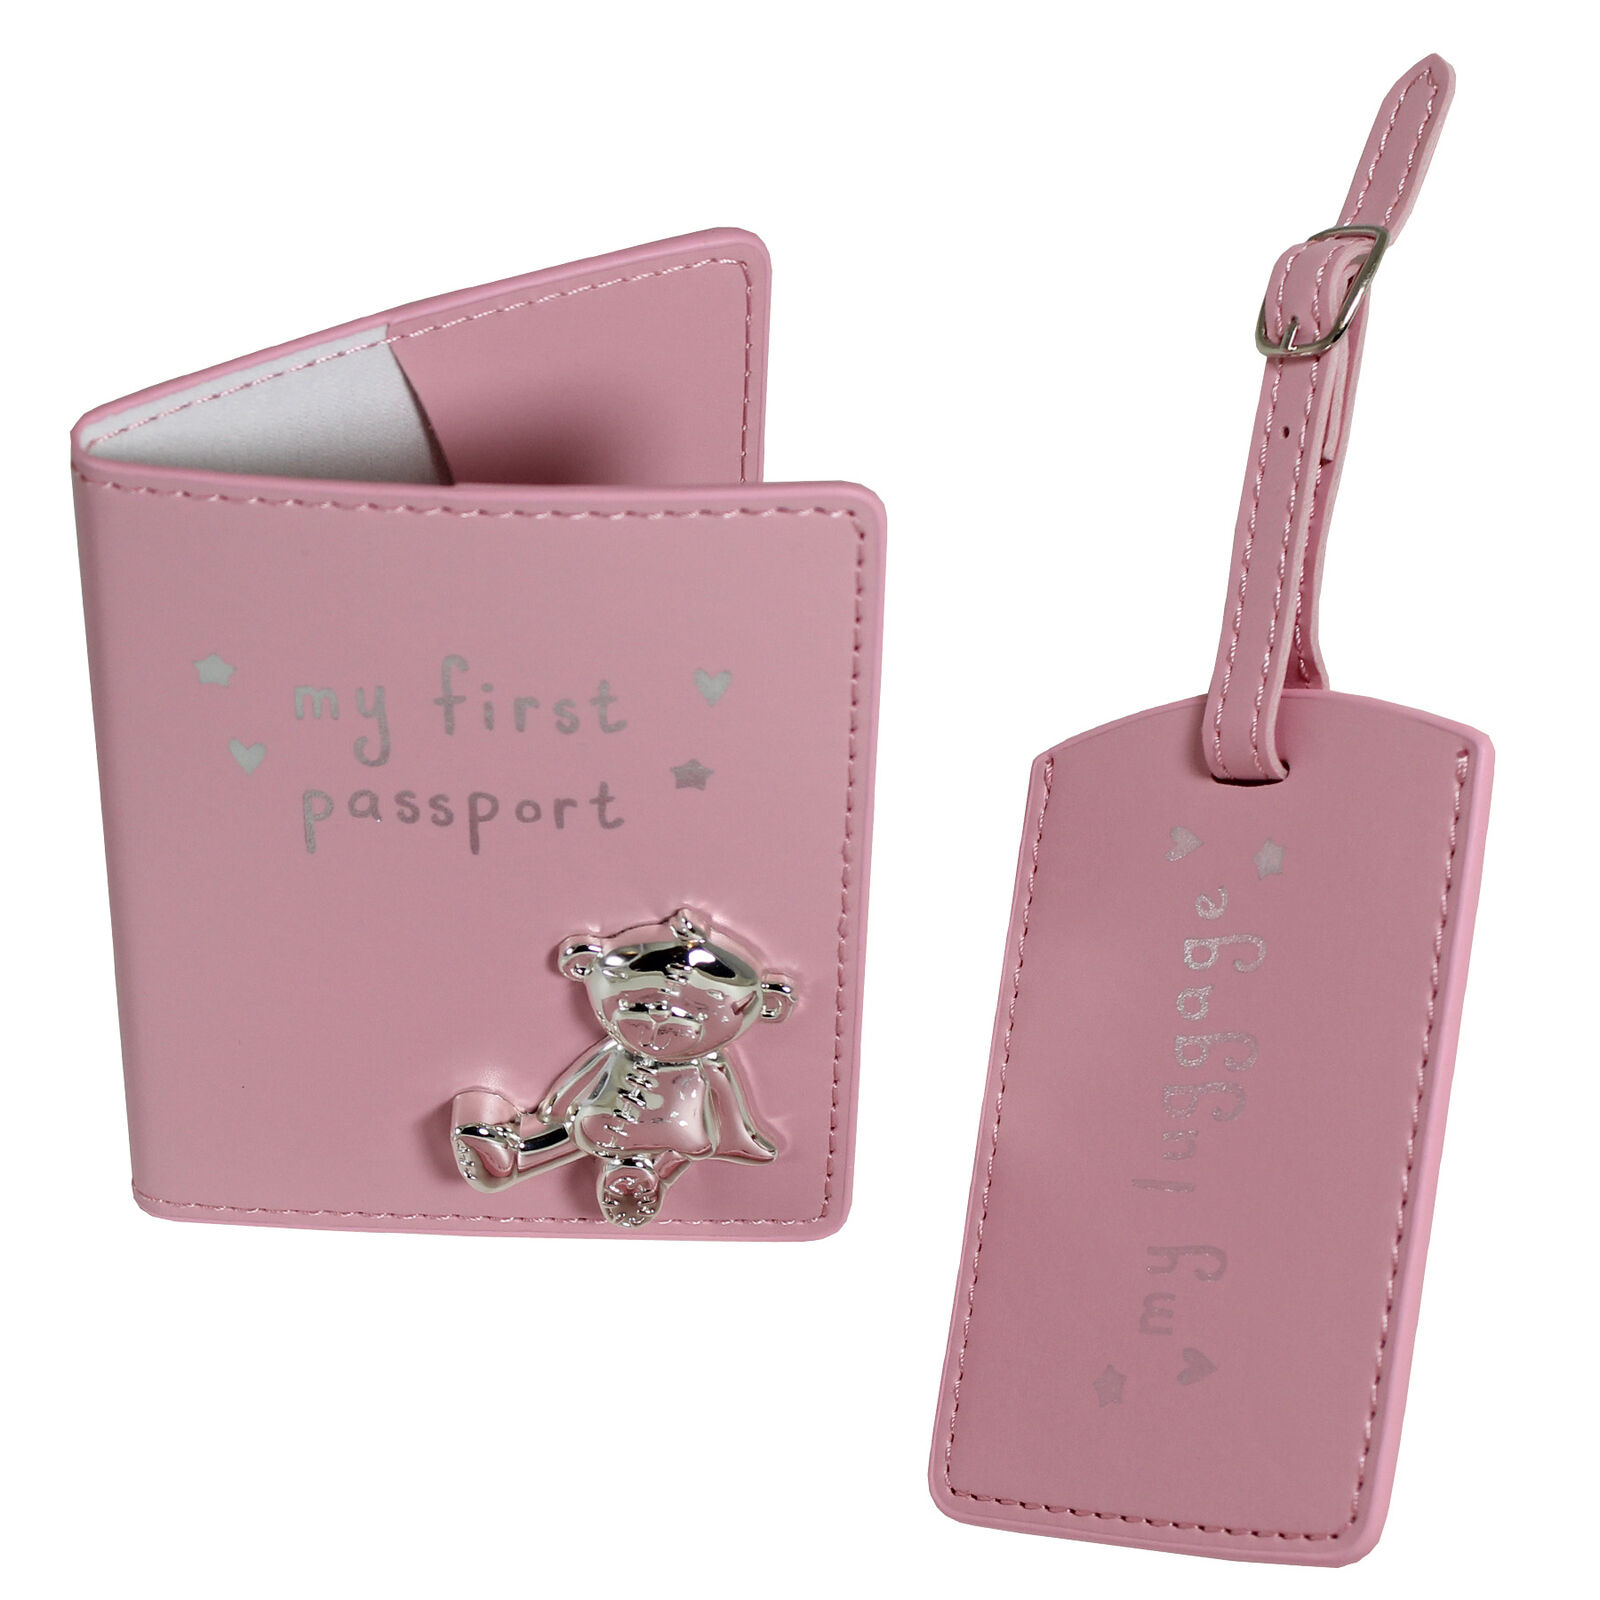 Button Corner First Passport Cover Luggage Tag Set - Pink